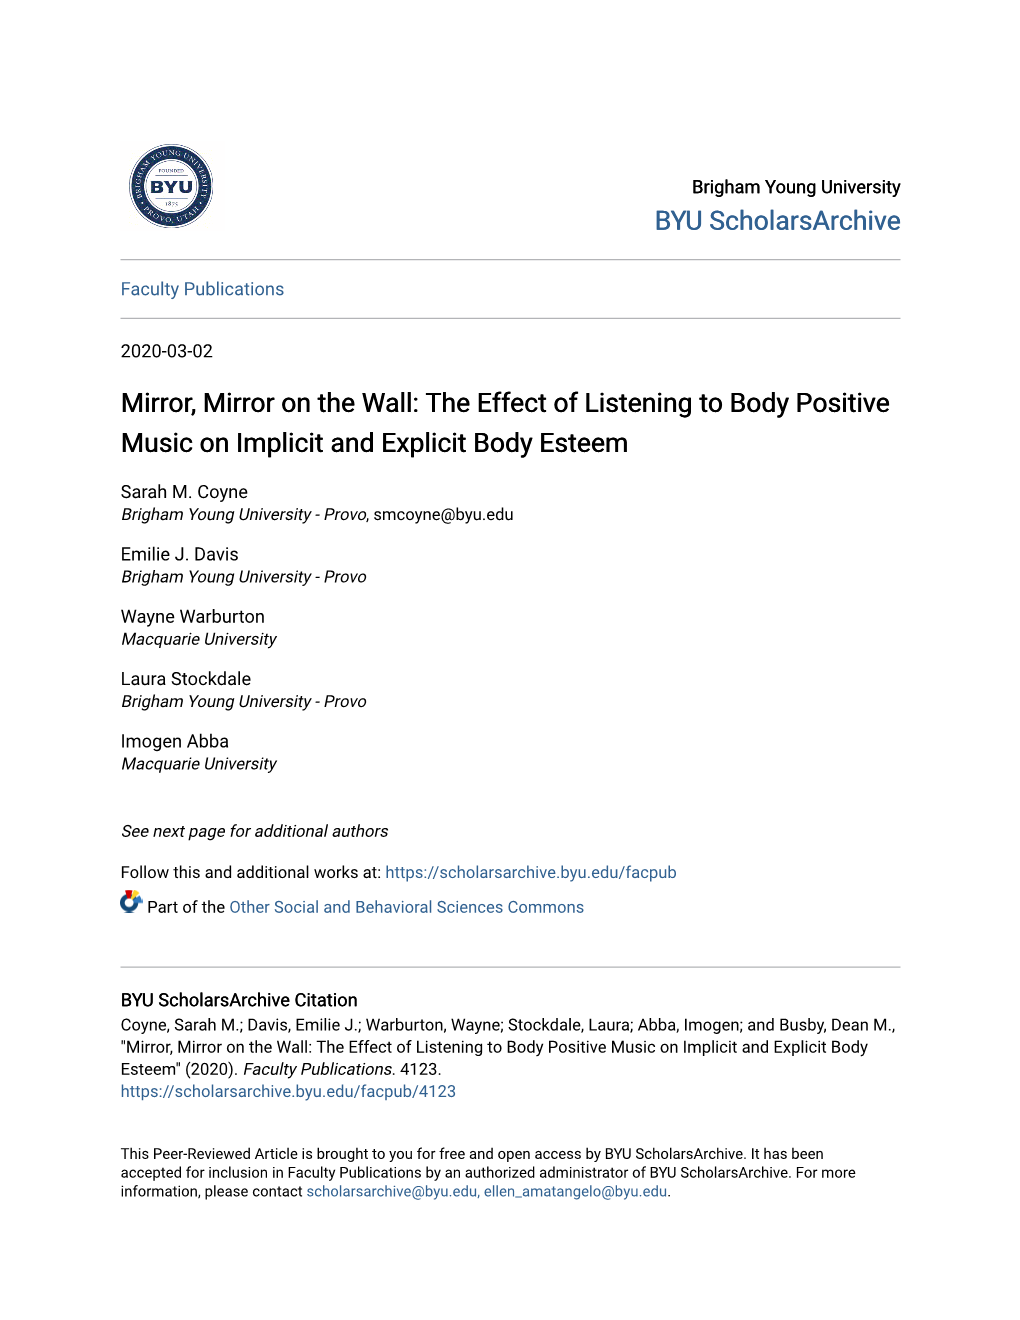 Mirror, Mirror on the Wall: the Effect of Listening to Body Positive Music on Implicit and Explicit Body Esteem